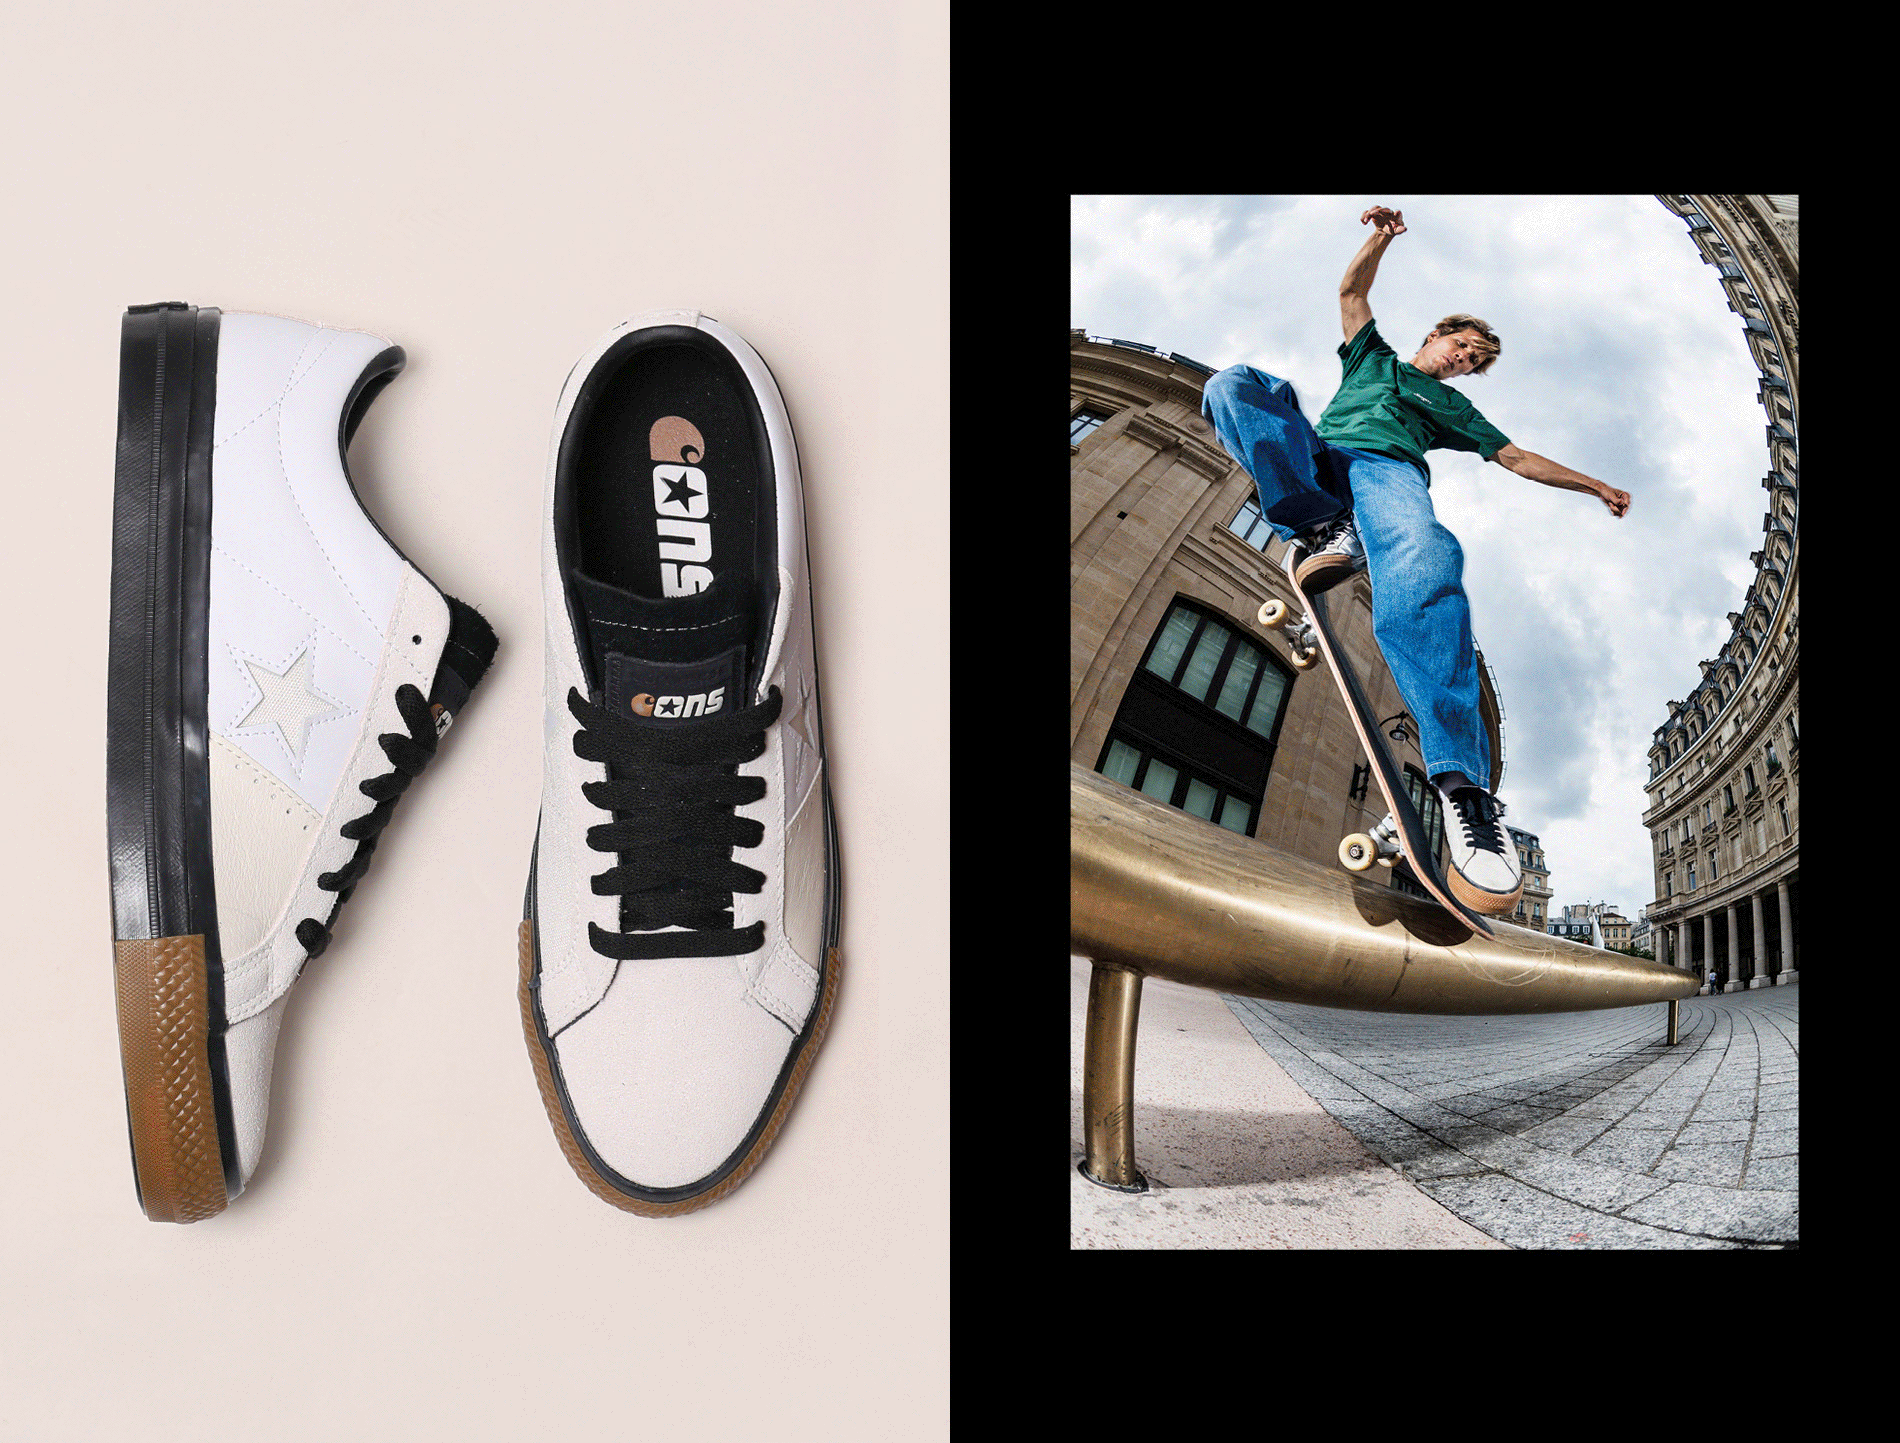 Felipe Bartolome grabbing melon in the Mid top Fastbreak. Sylvain Tognelli bar hopping in the One Star, both shot by Alex Pires for Converse Cons x Carhartt WIP